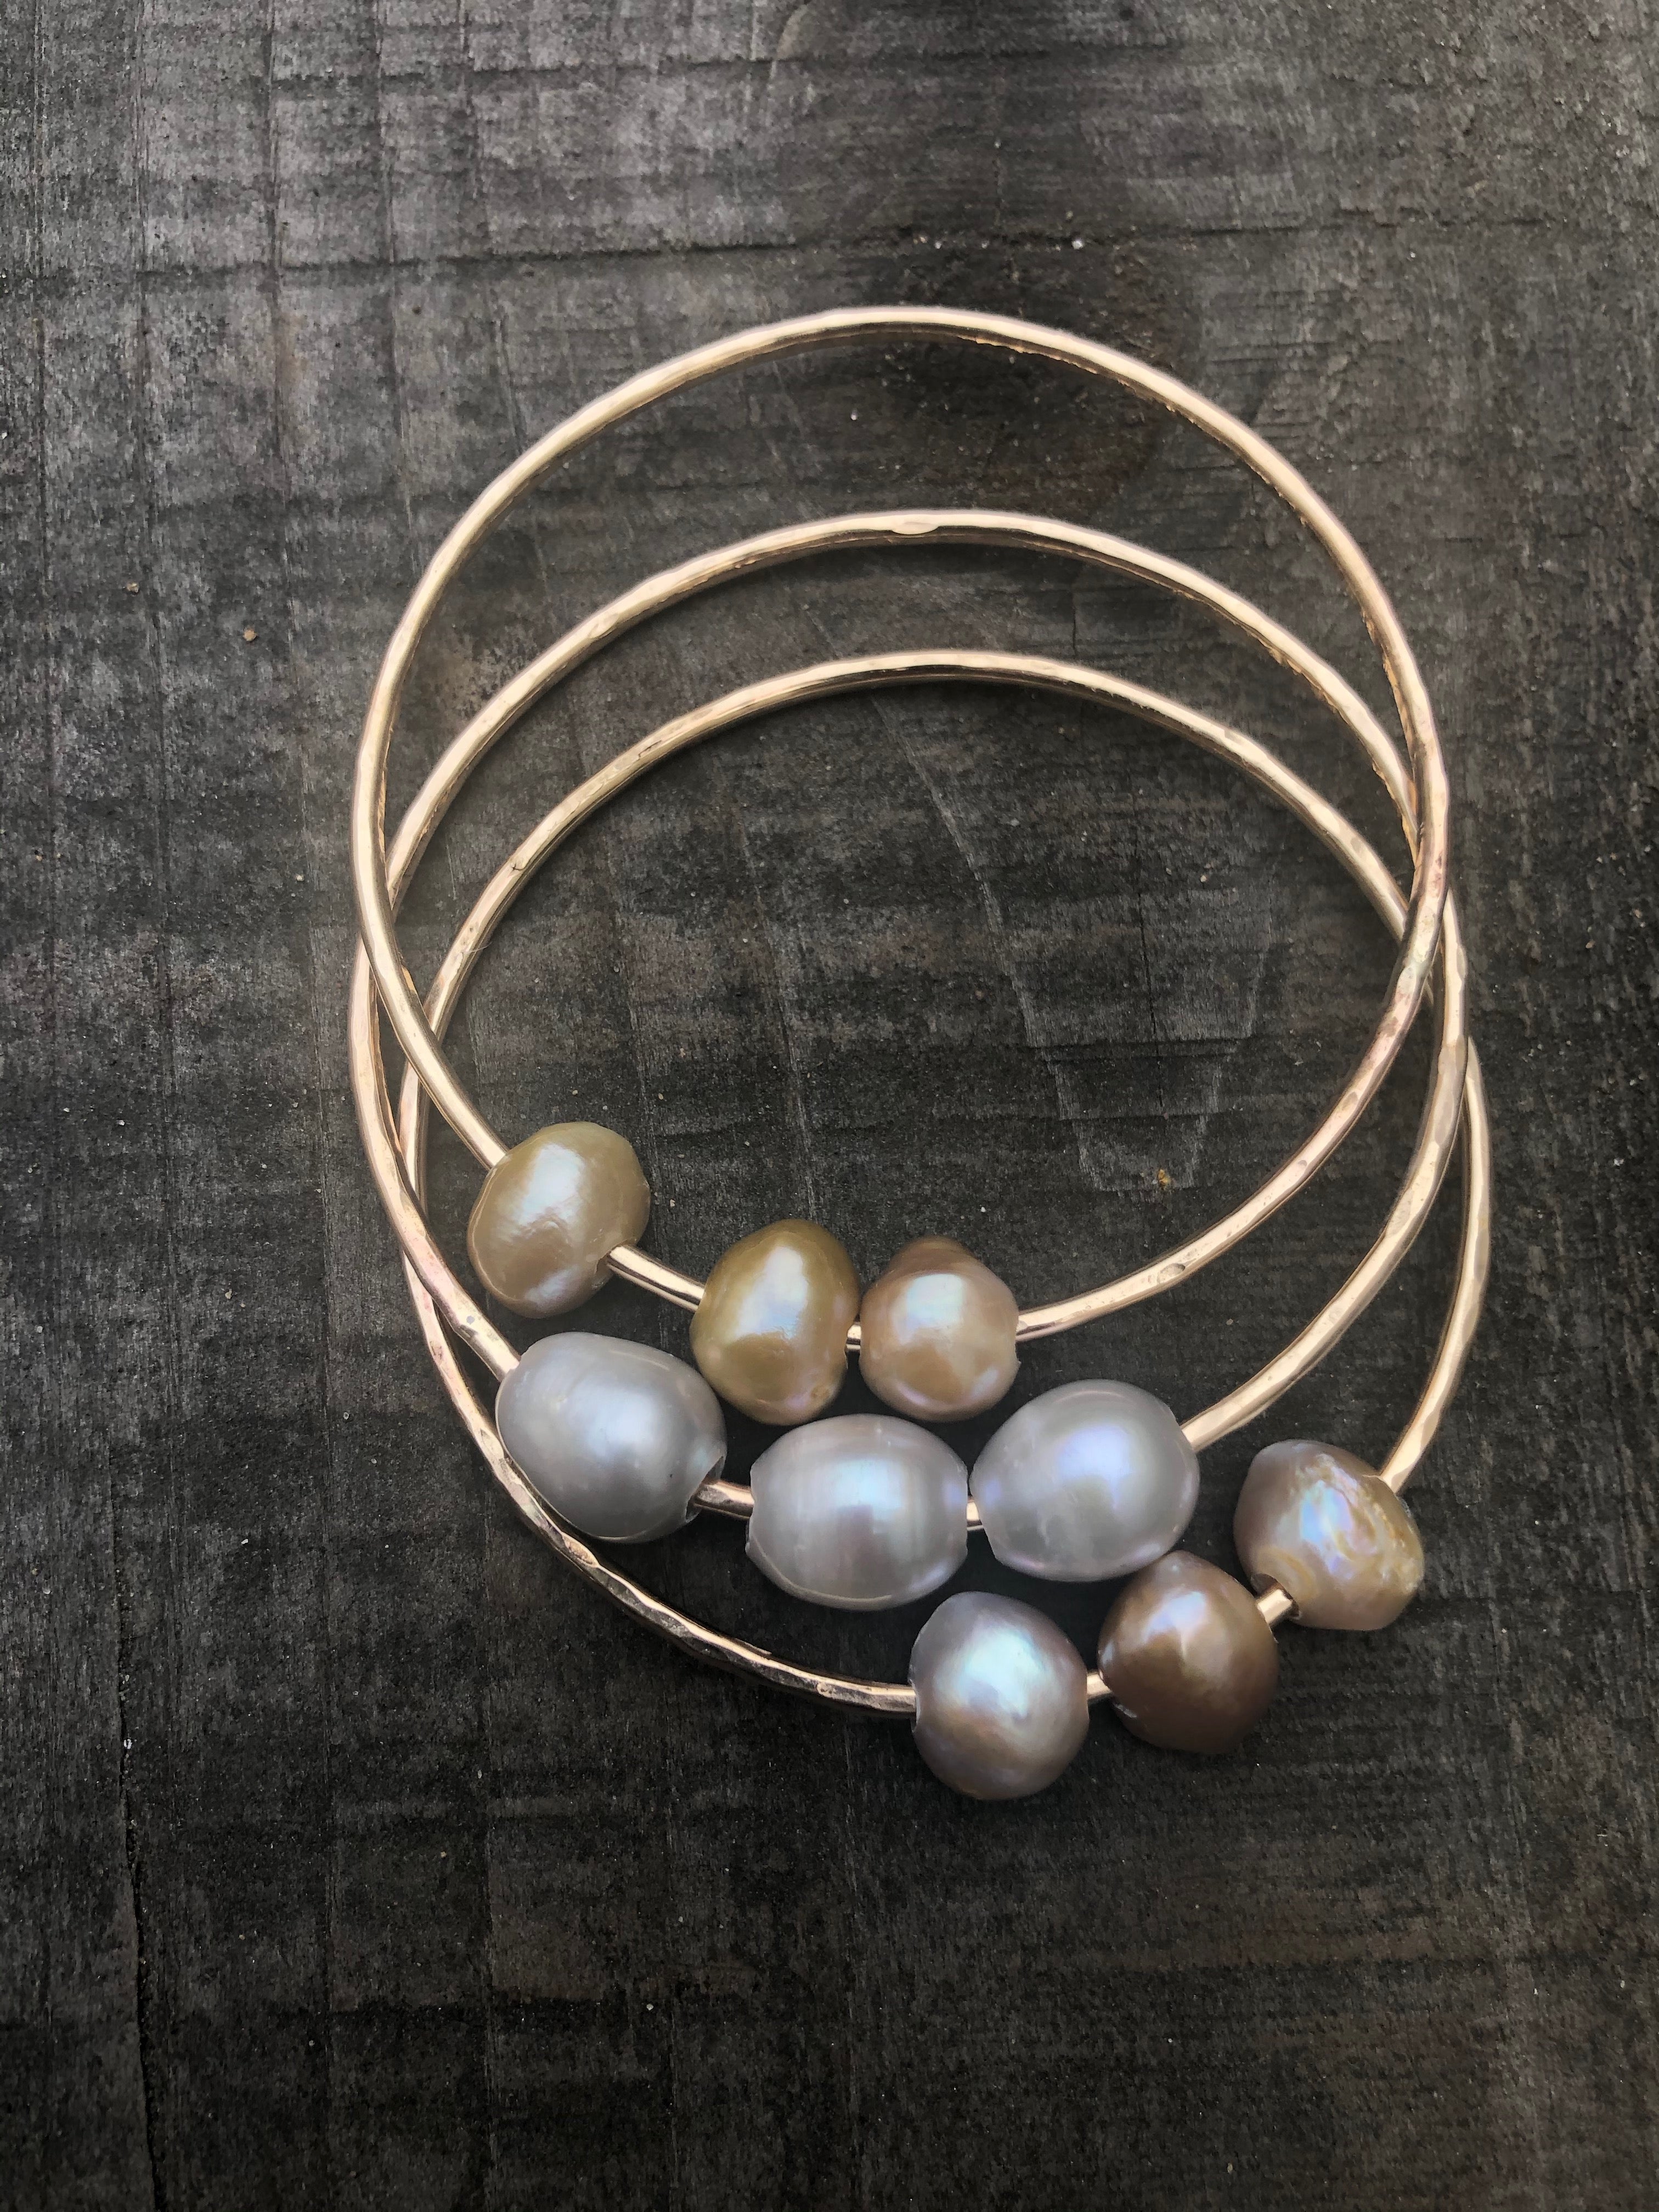 on a dark wood background there are three bangles with three pearls on each. One pink, one white and one golden colored pearls.